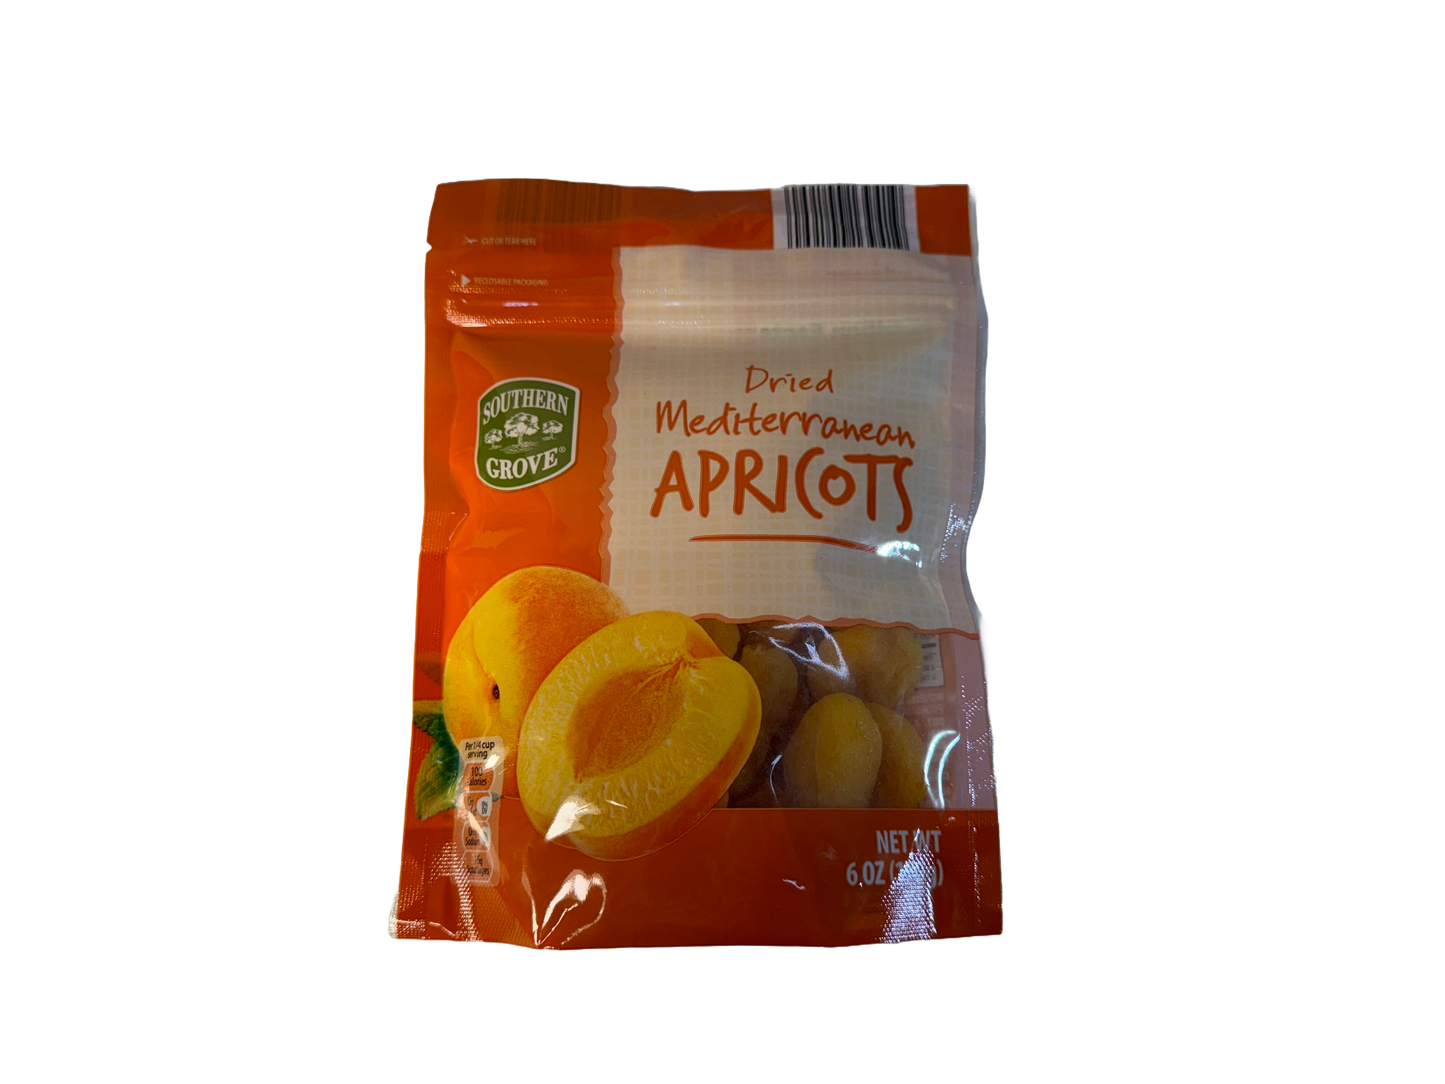 Southern Grove Dried Mediterranean Apricots, 6 oz